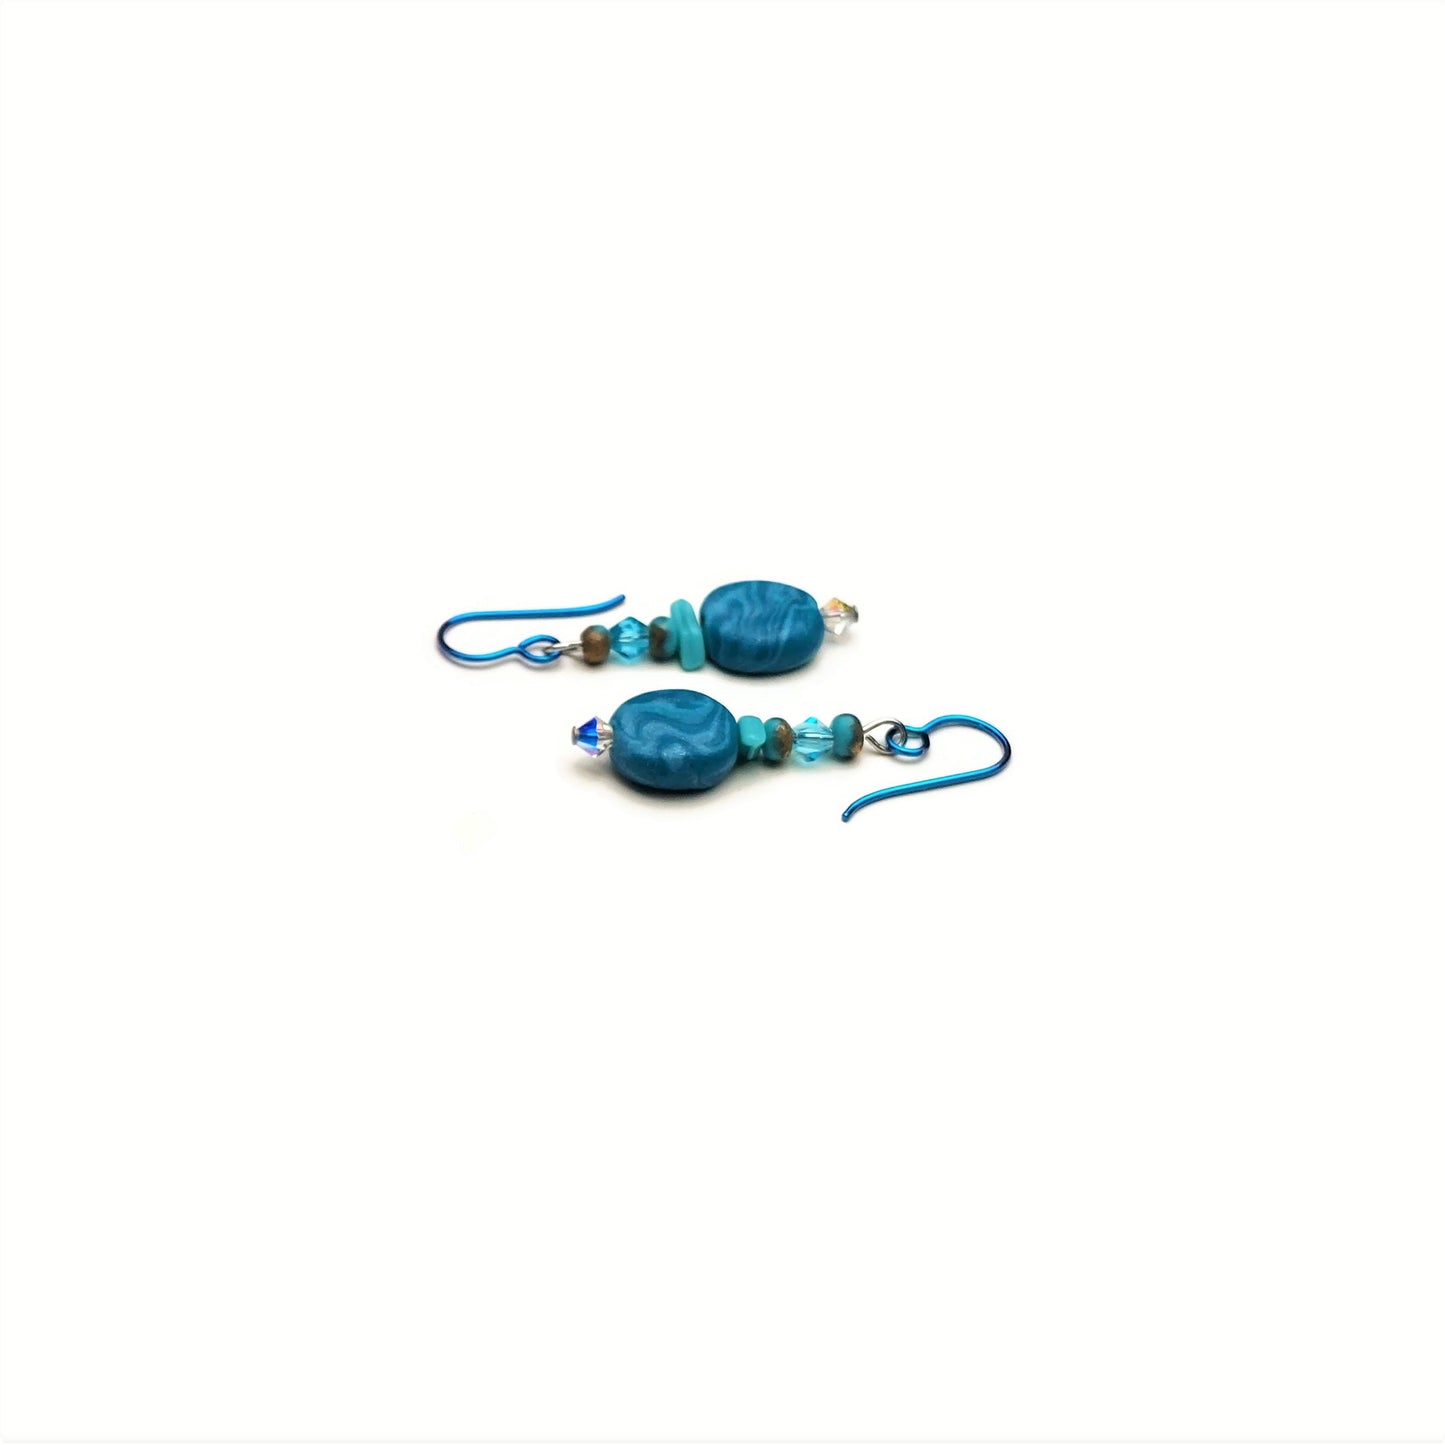 Polymer clay disk bead and crystal drop earrings with teal niobium ear wires on white background